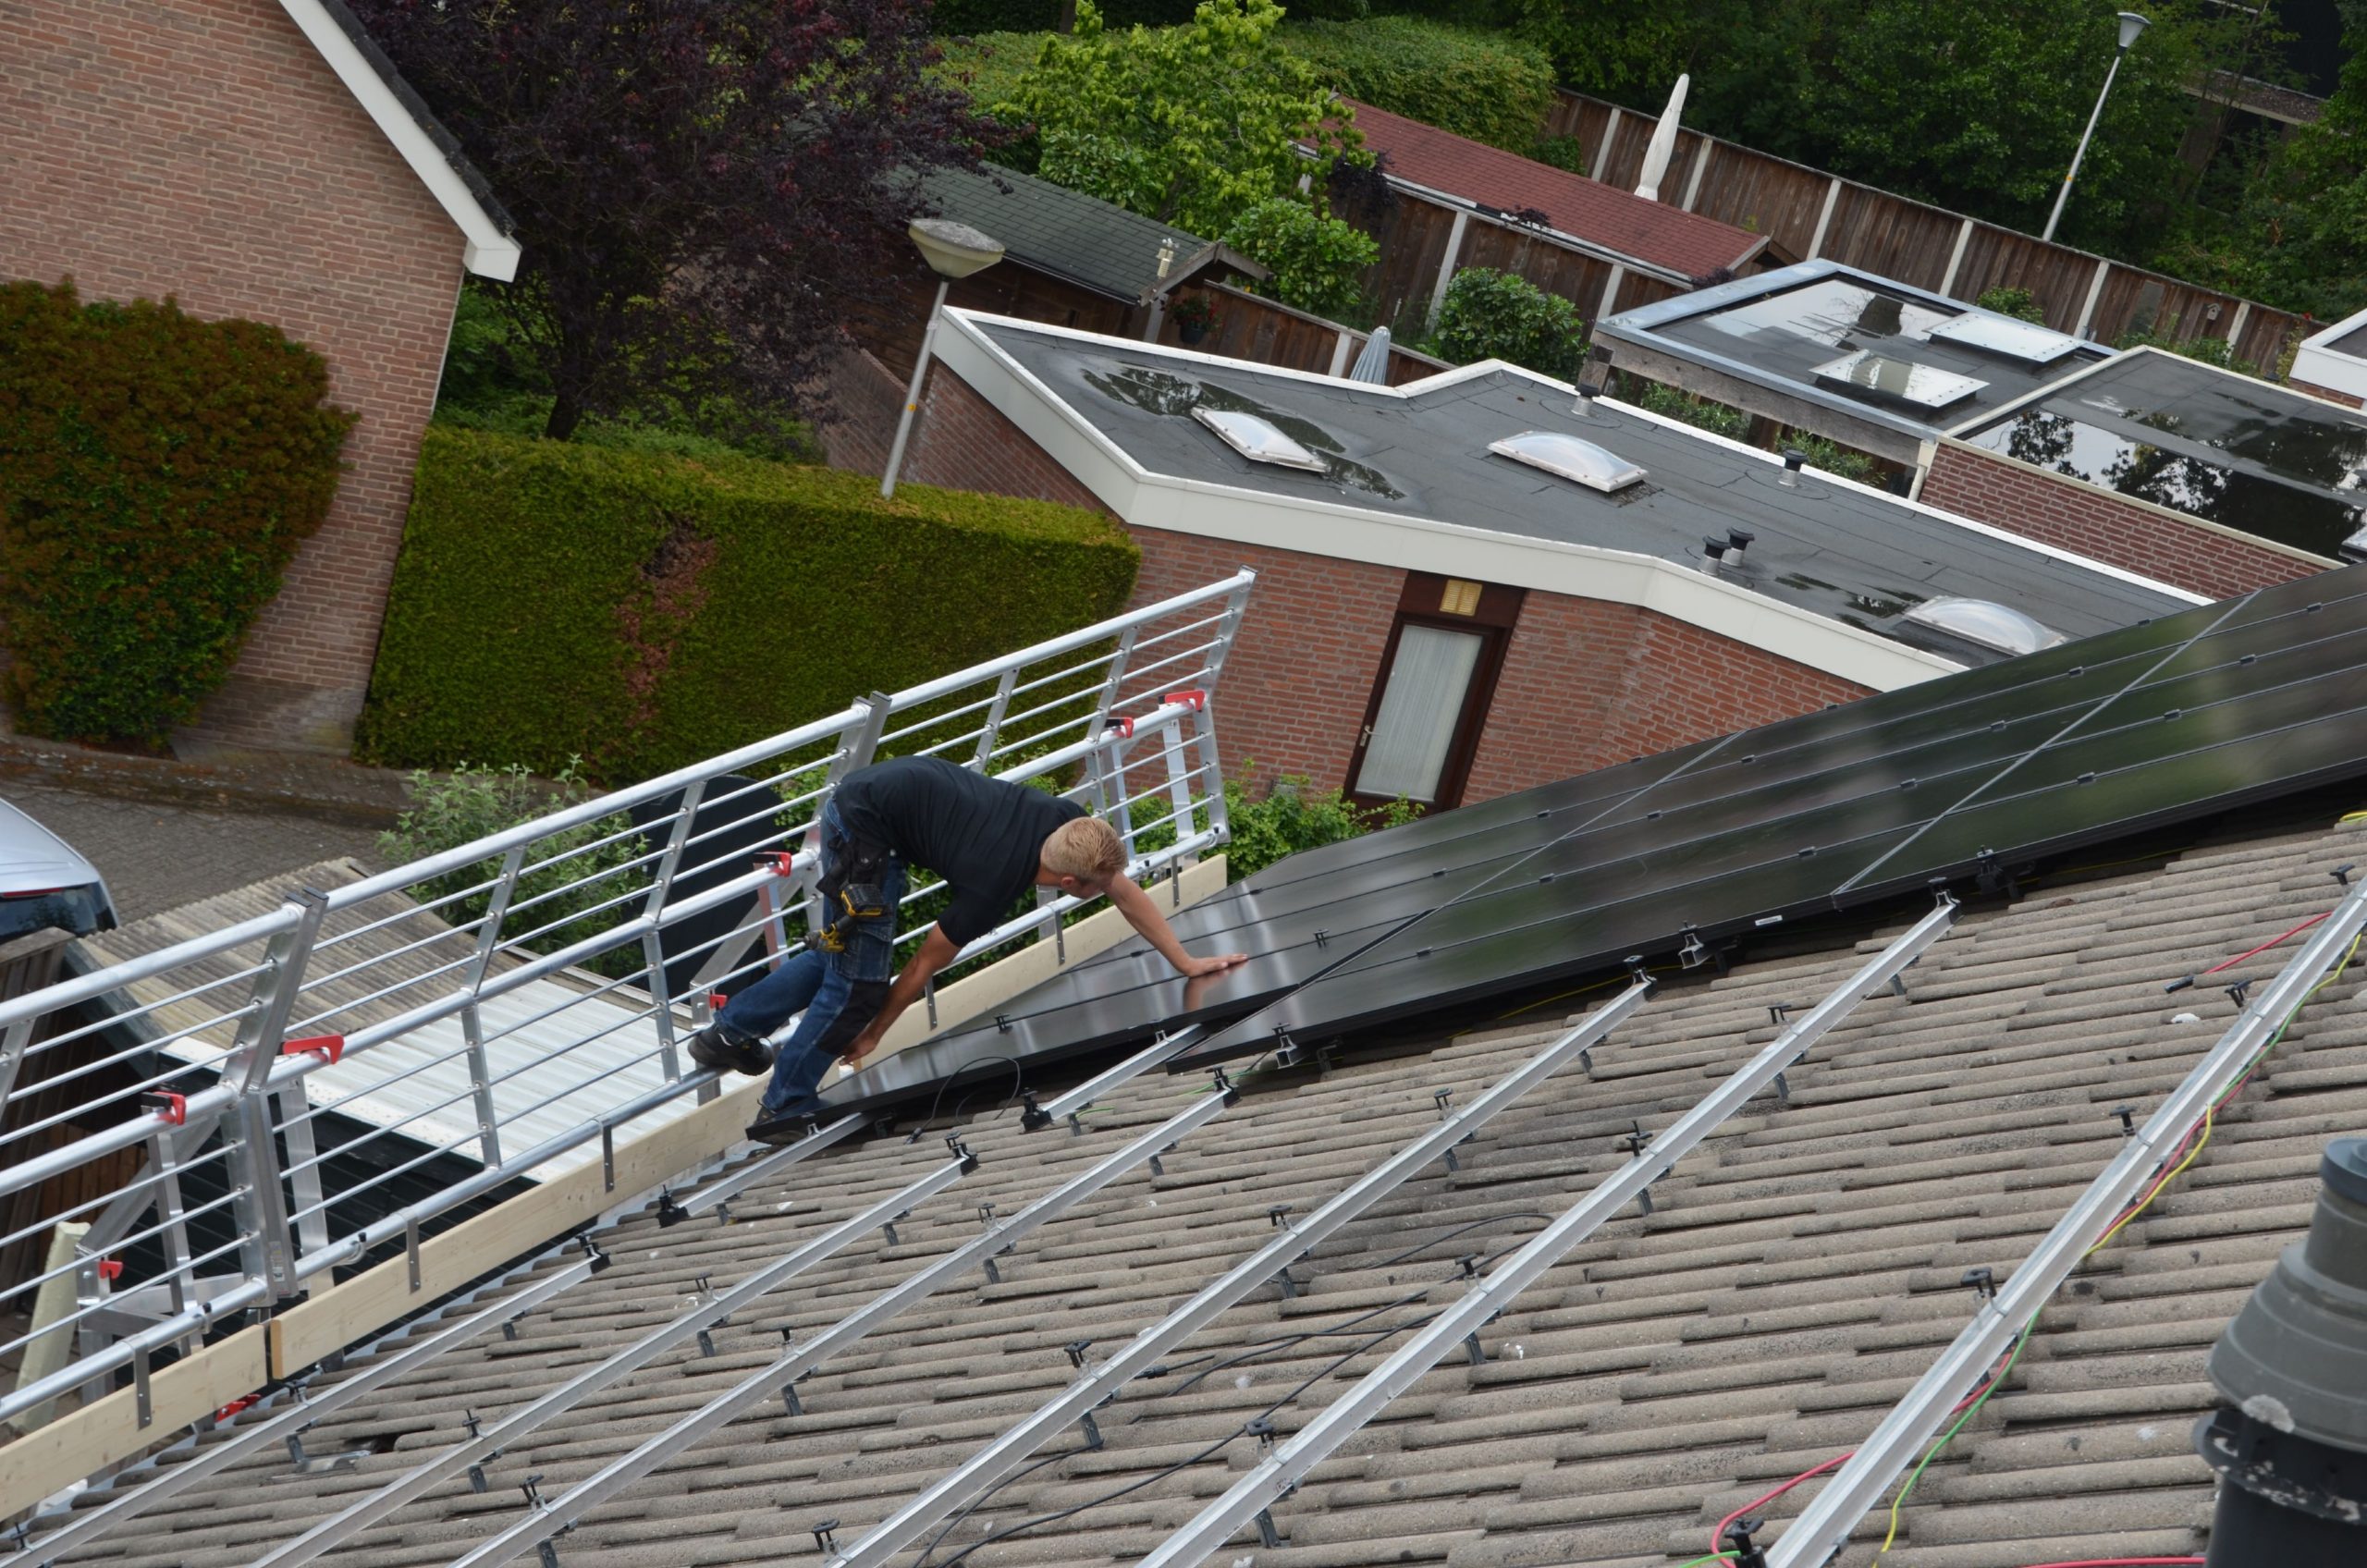 Installing solar panels is done safely and quickly with the RSS fall protection system